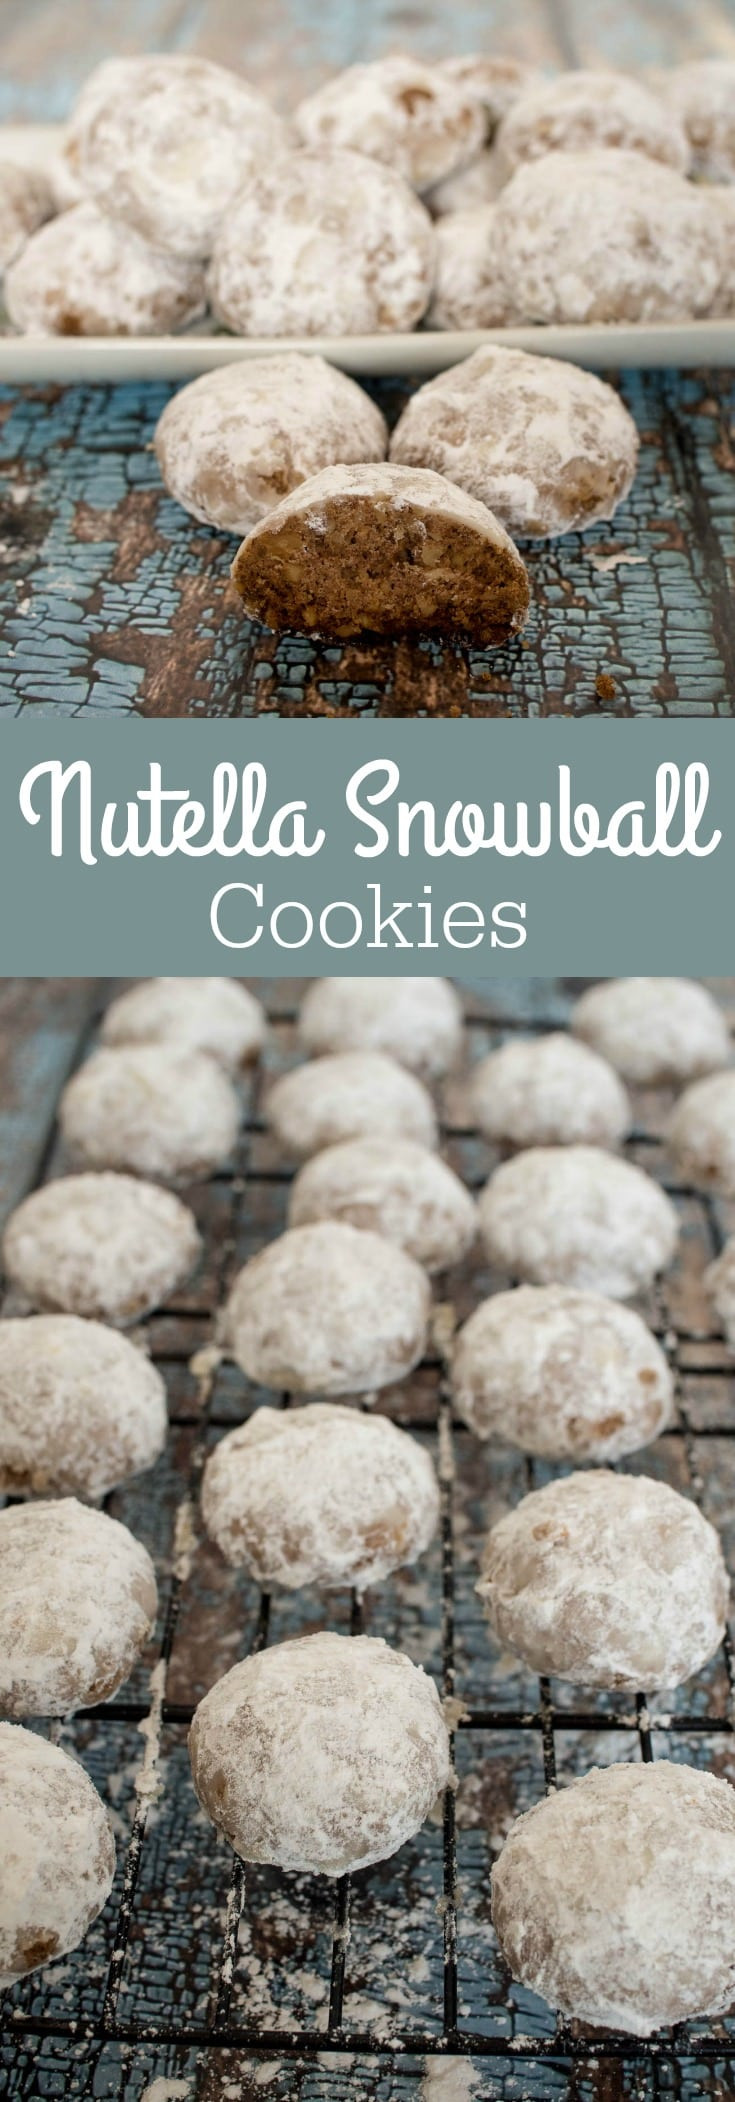 Christmas Cookies With Powdered Sugar
 Nutella Snowball Cookies